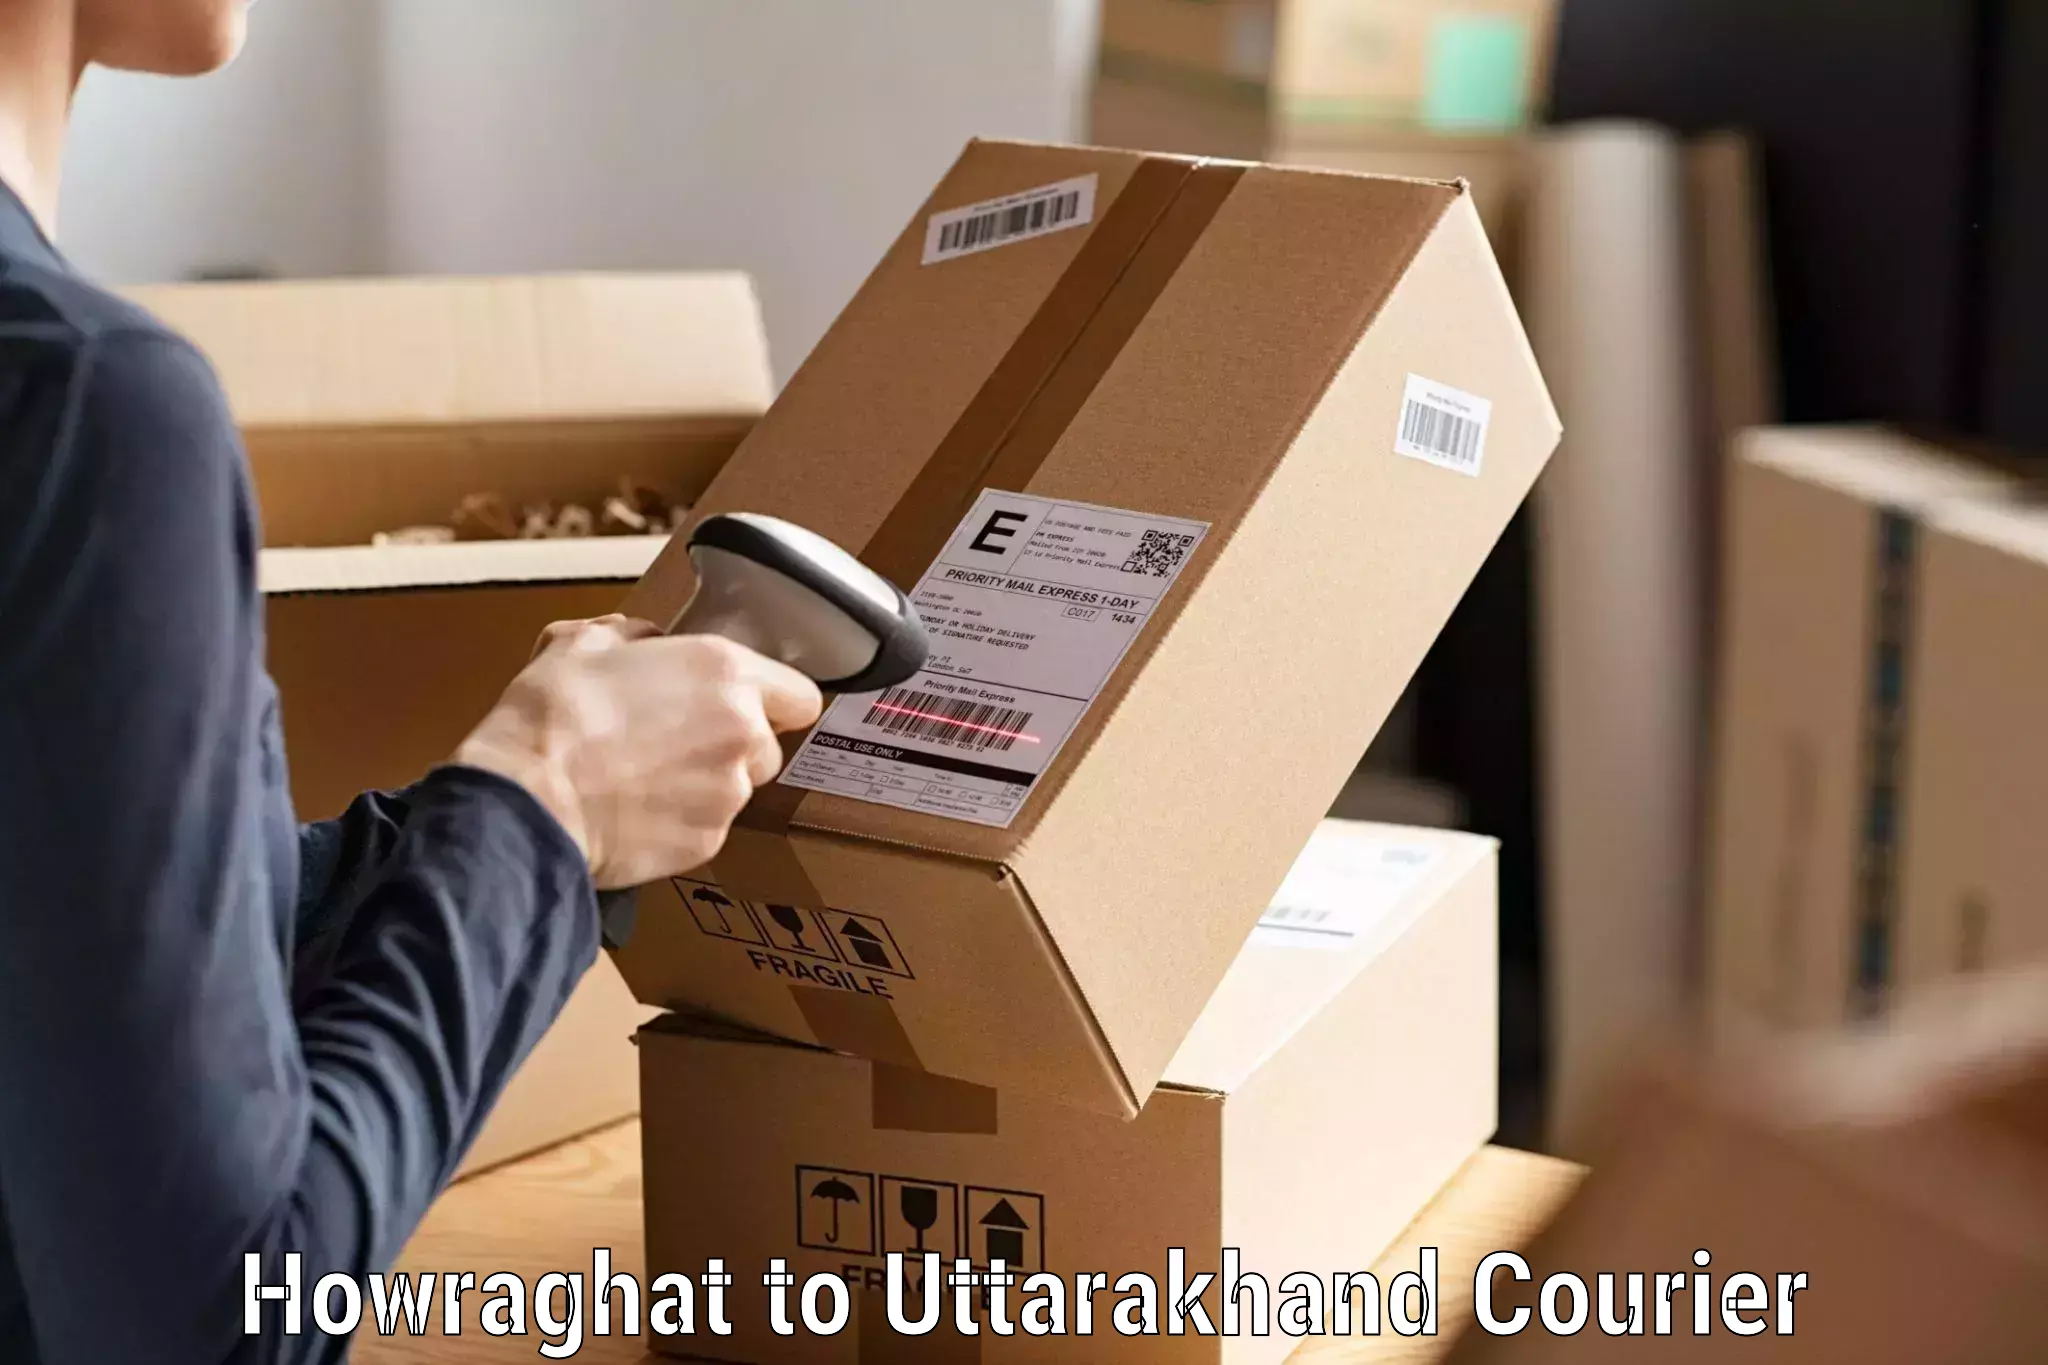 Online package tracking Howraghat to Almora